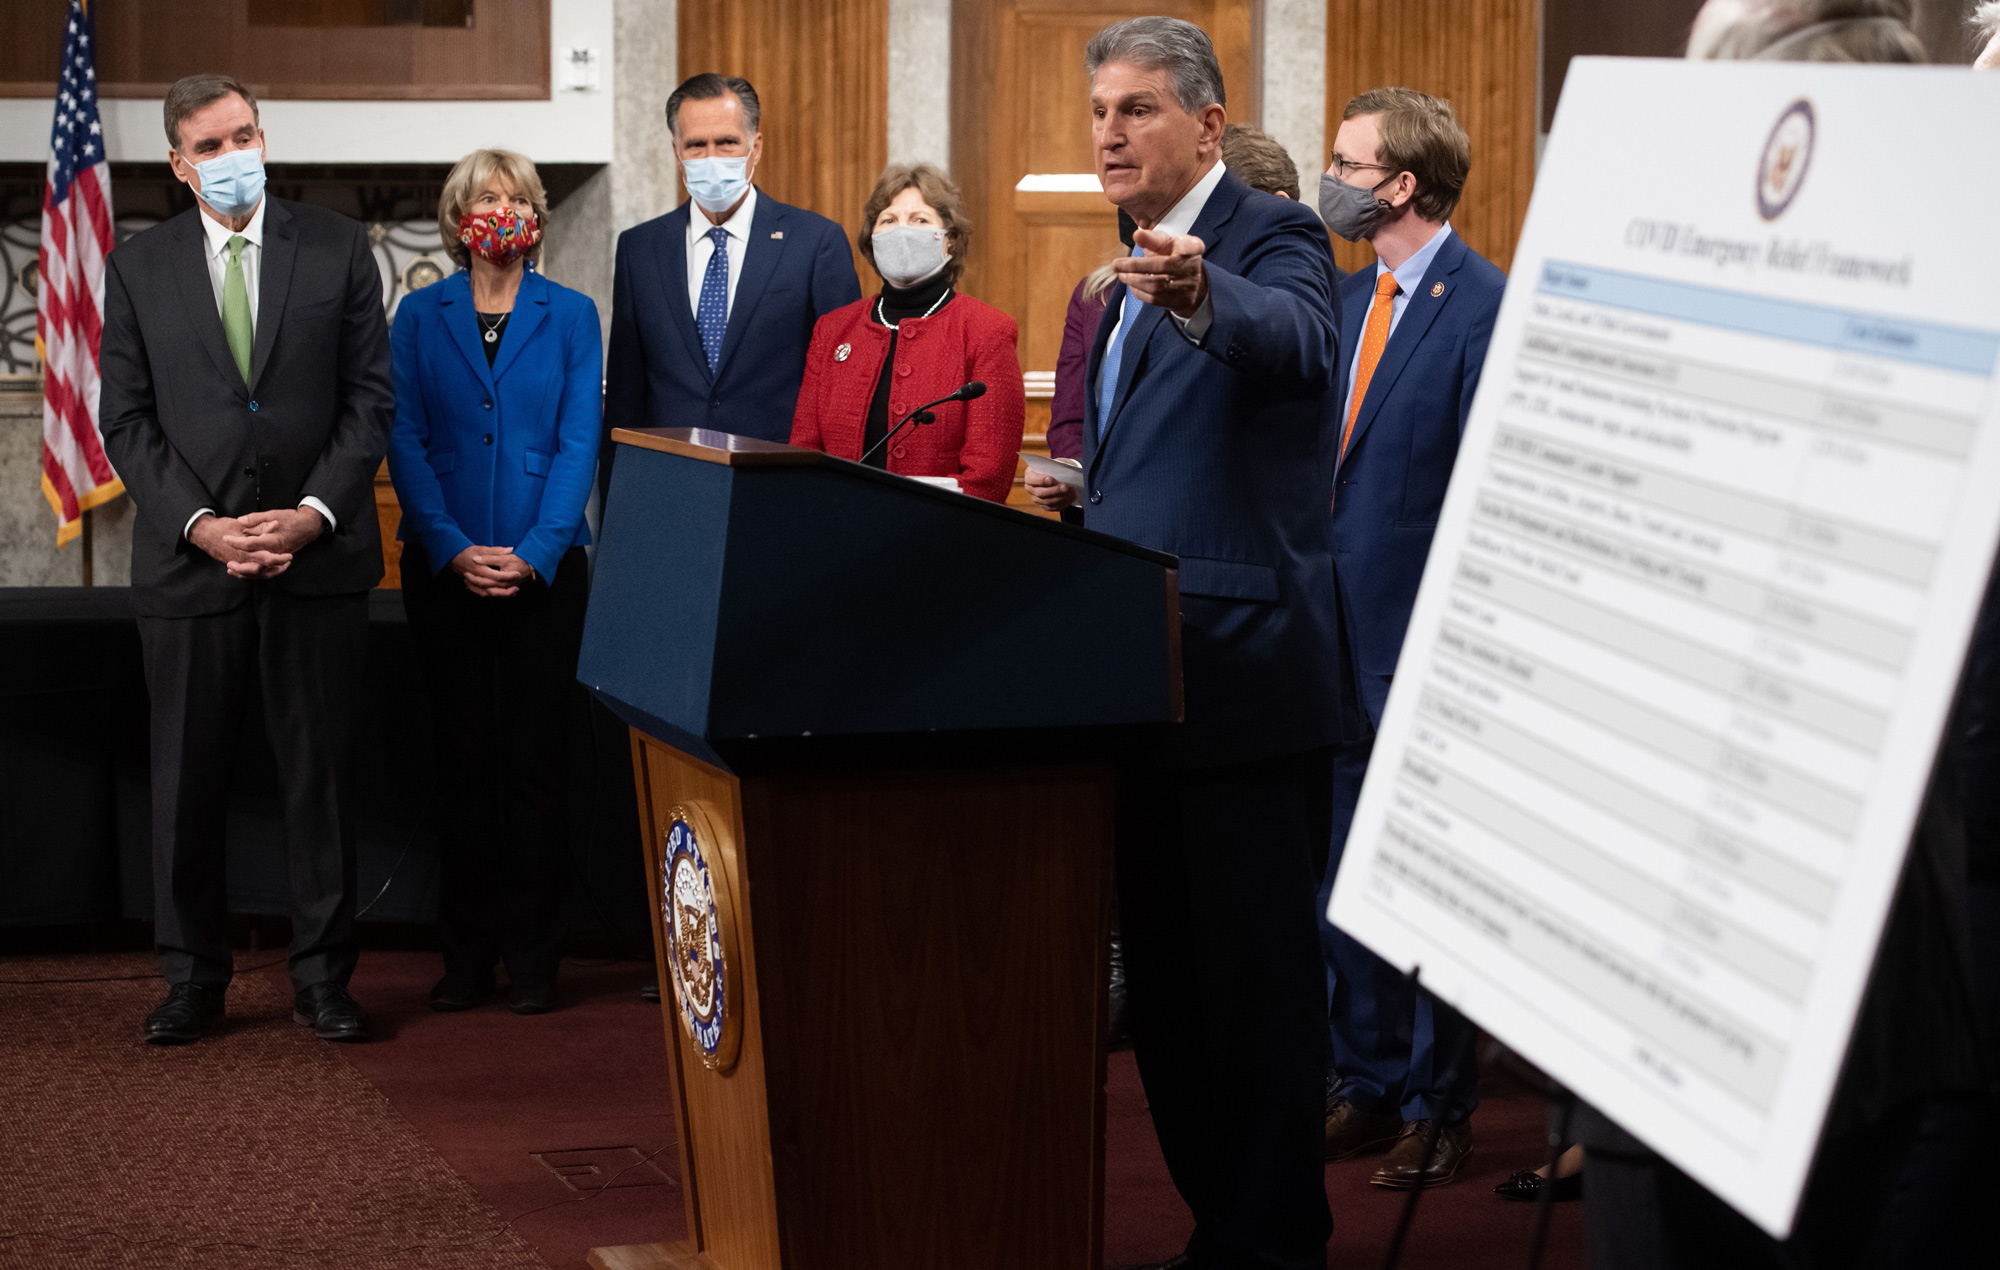 US Senator Joe Manchin, center, speaks alongside a bipartisan group of Democrat and Republican members of Congress as they announce a proposal for a Covid-19 relief bill on Capitol Hill in Washington, DC, on December 1.